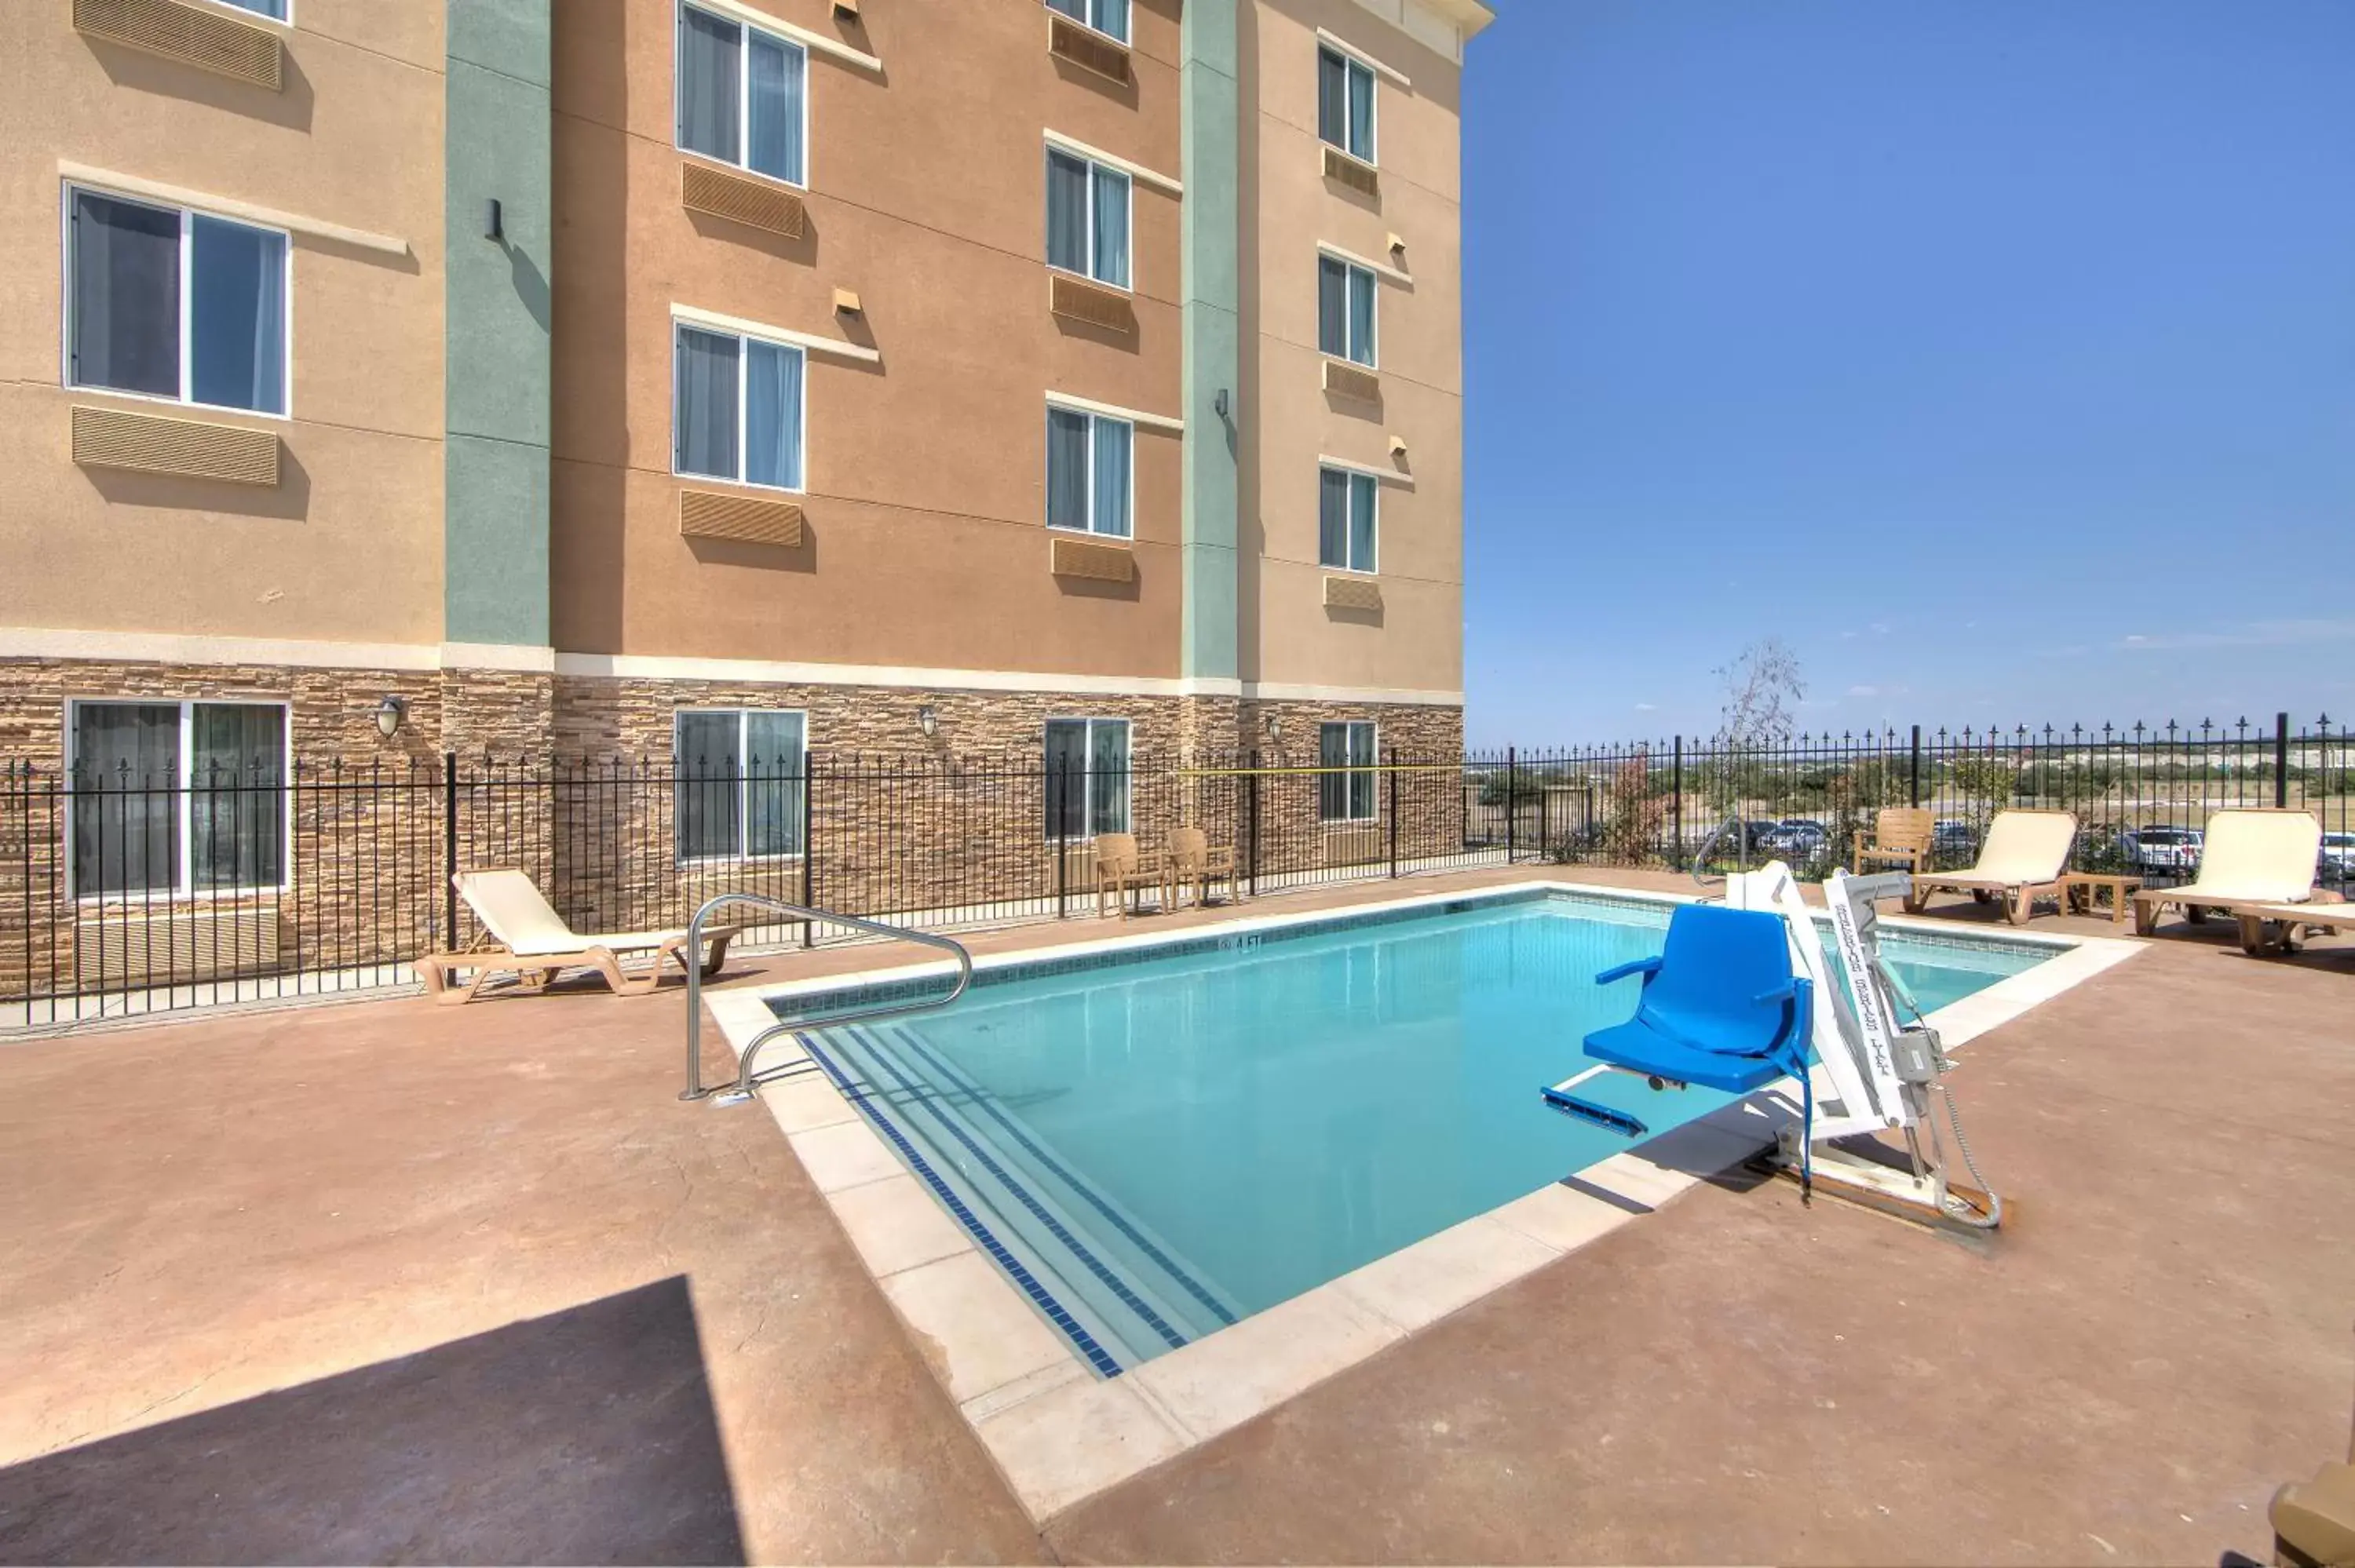 Swimming Pool in Comfort Inn & Suites, White Settlement-Fort Worth West, TX